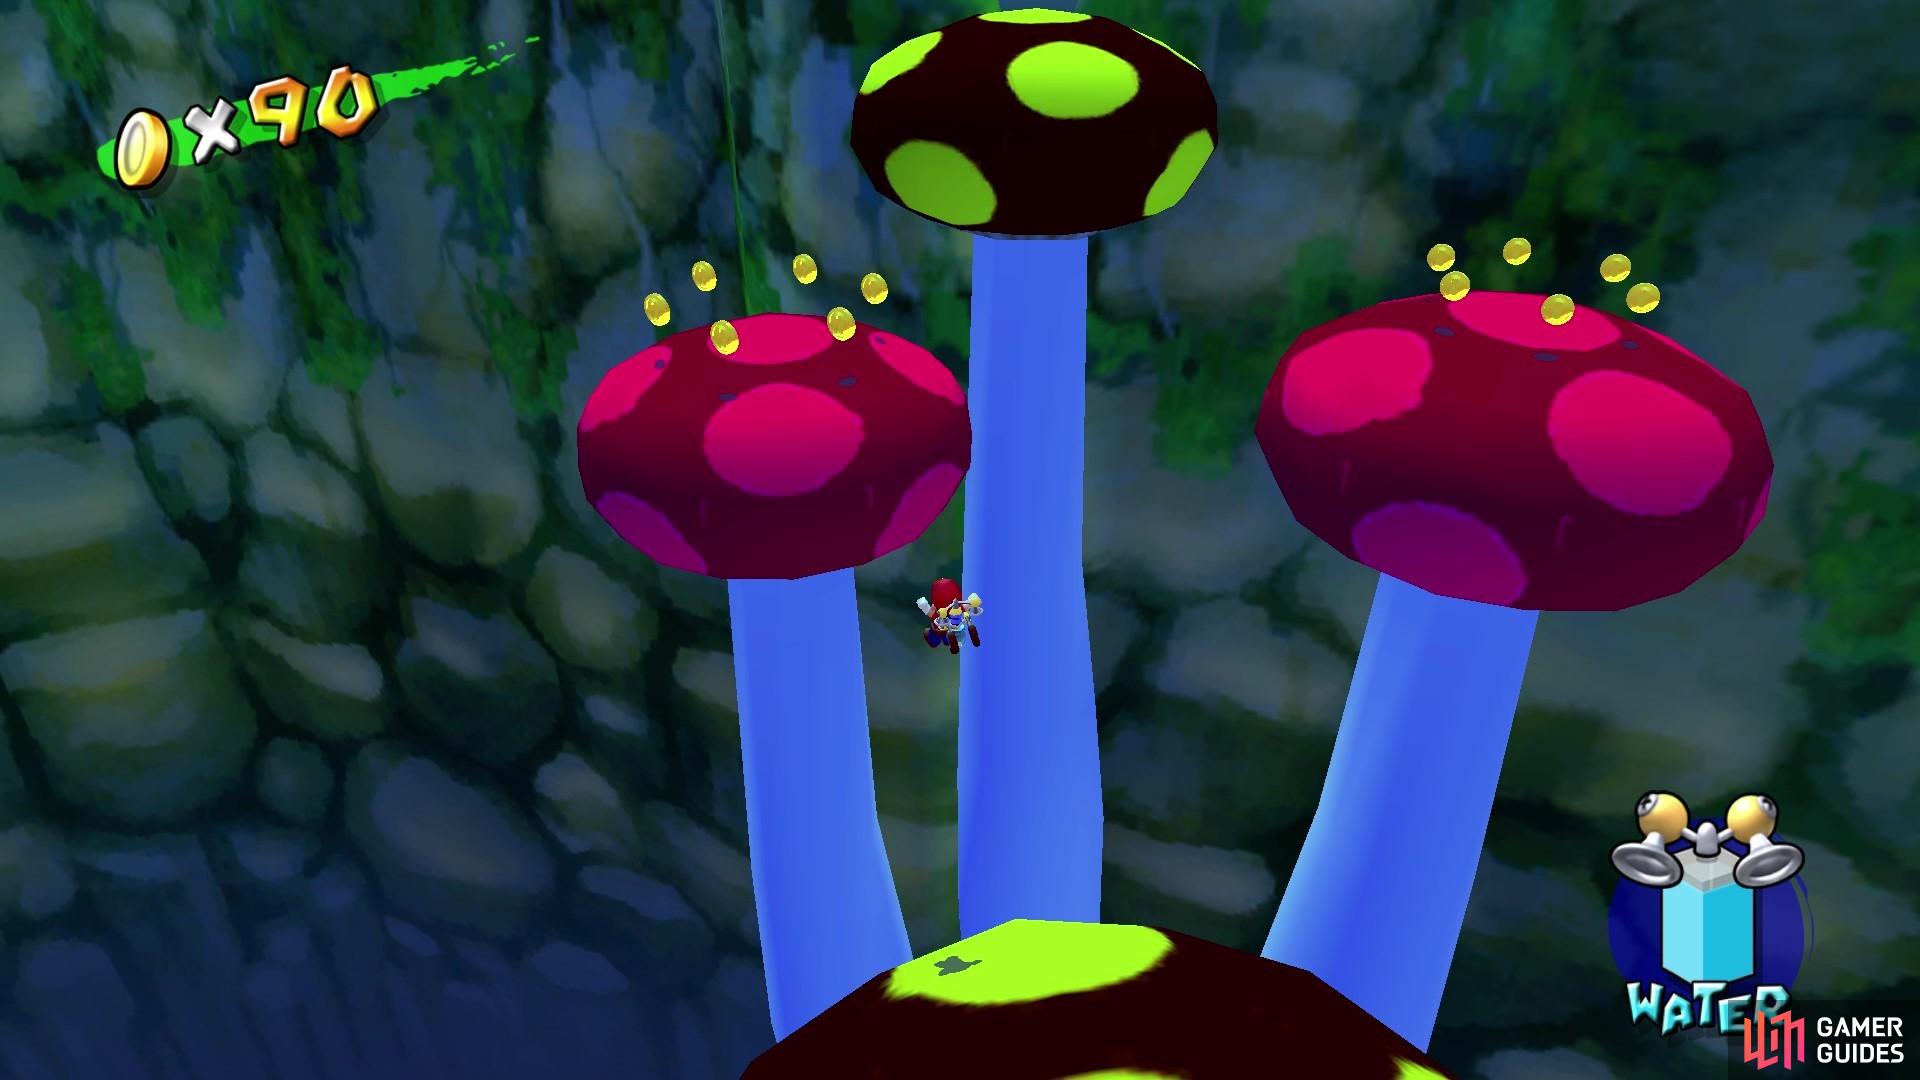 There's 40 coins to grab on the toadstools. 